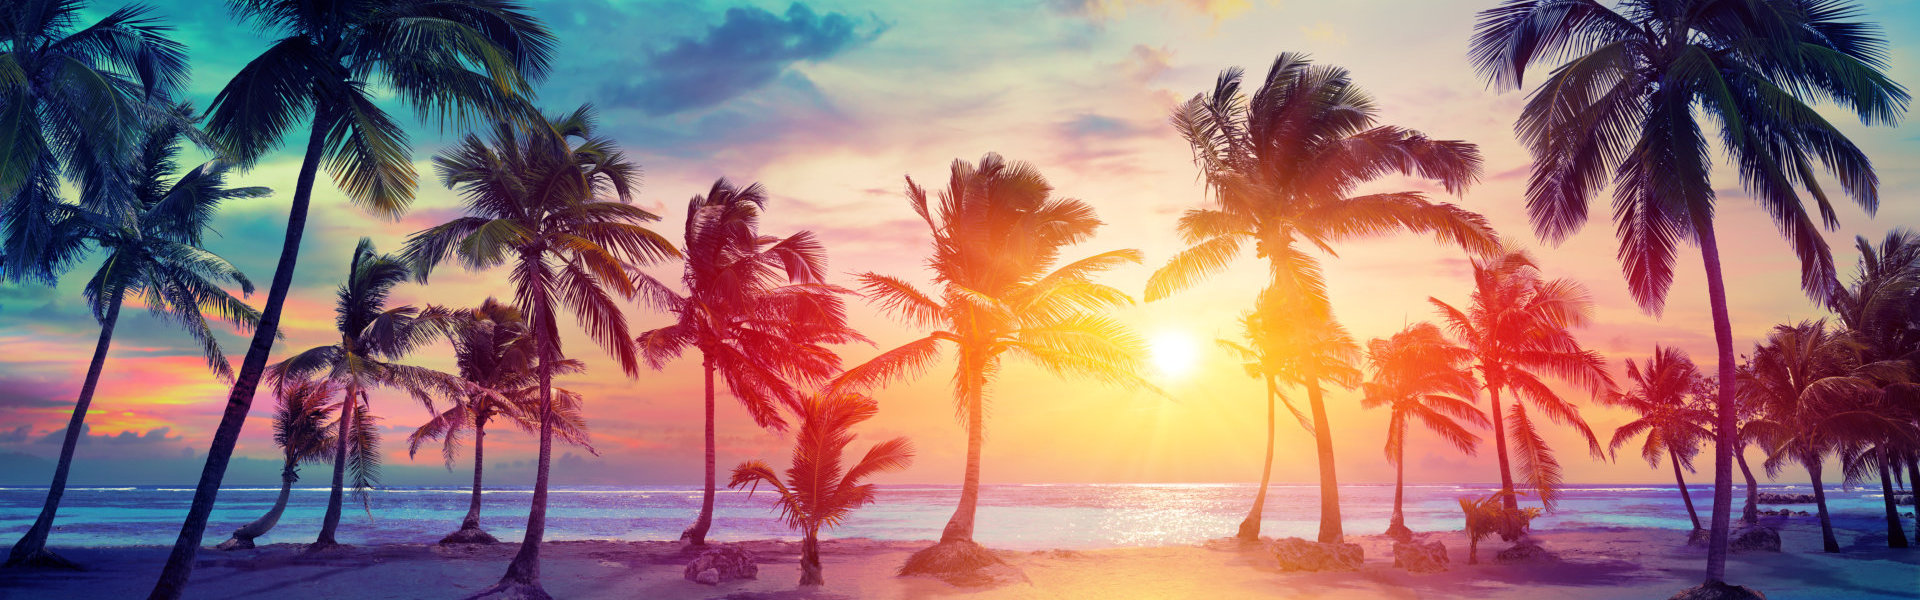 Palm Trees Silhouettes On Tropical Beach